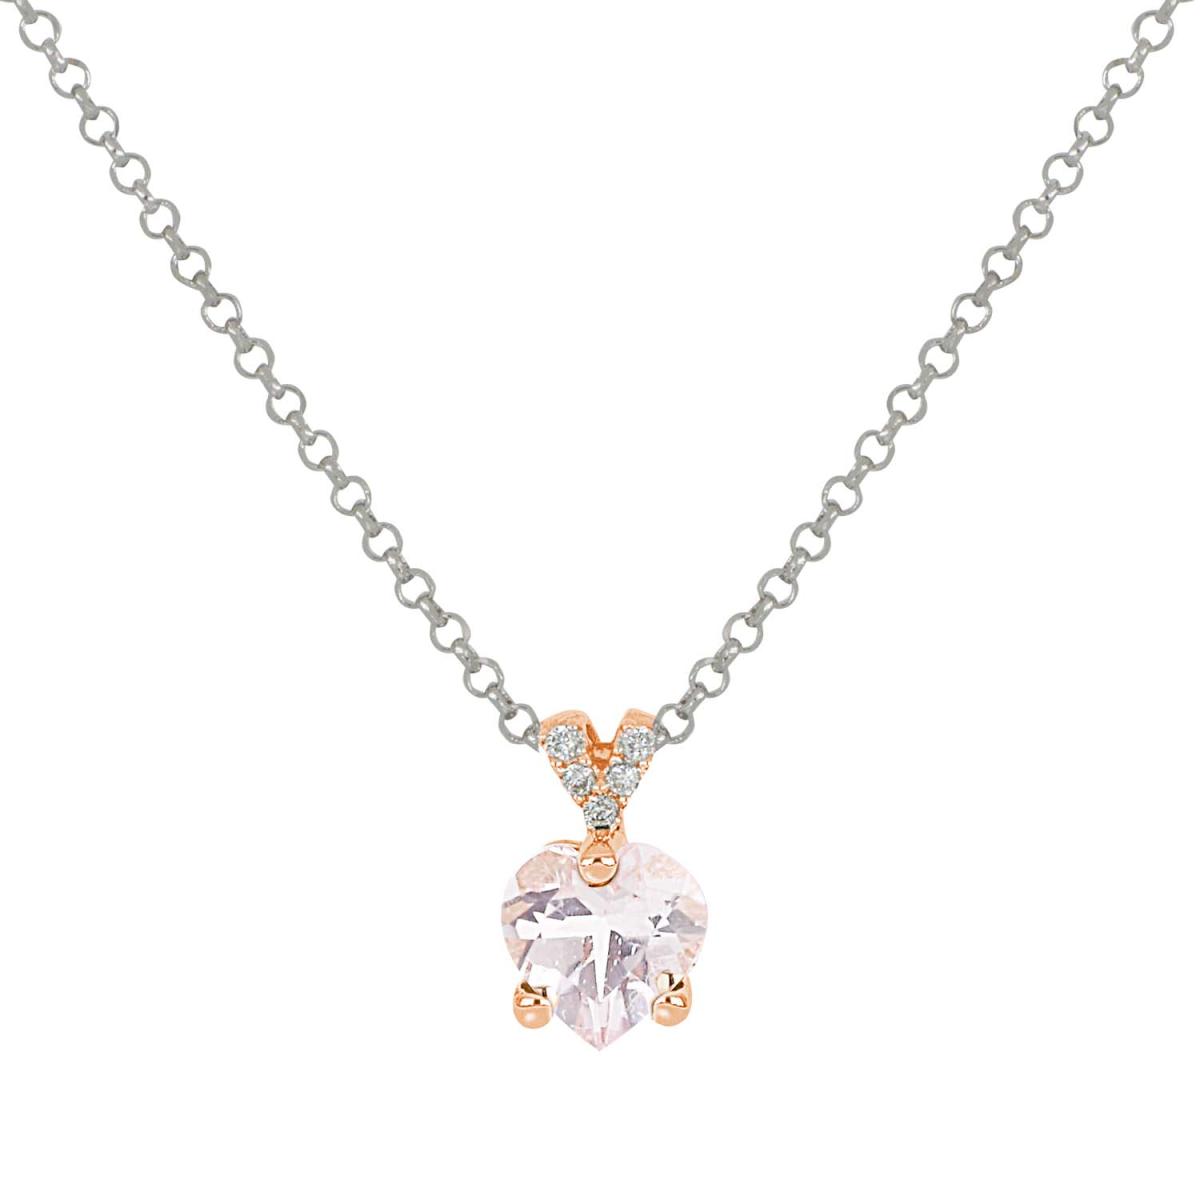 Gold necklace with heart morganite and diamonds - CD614/MO-LH